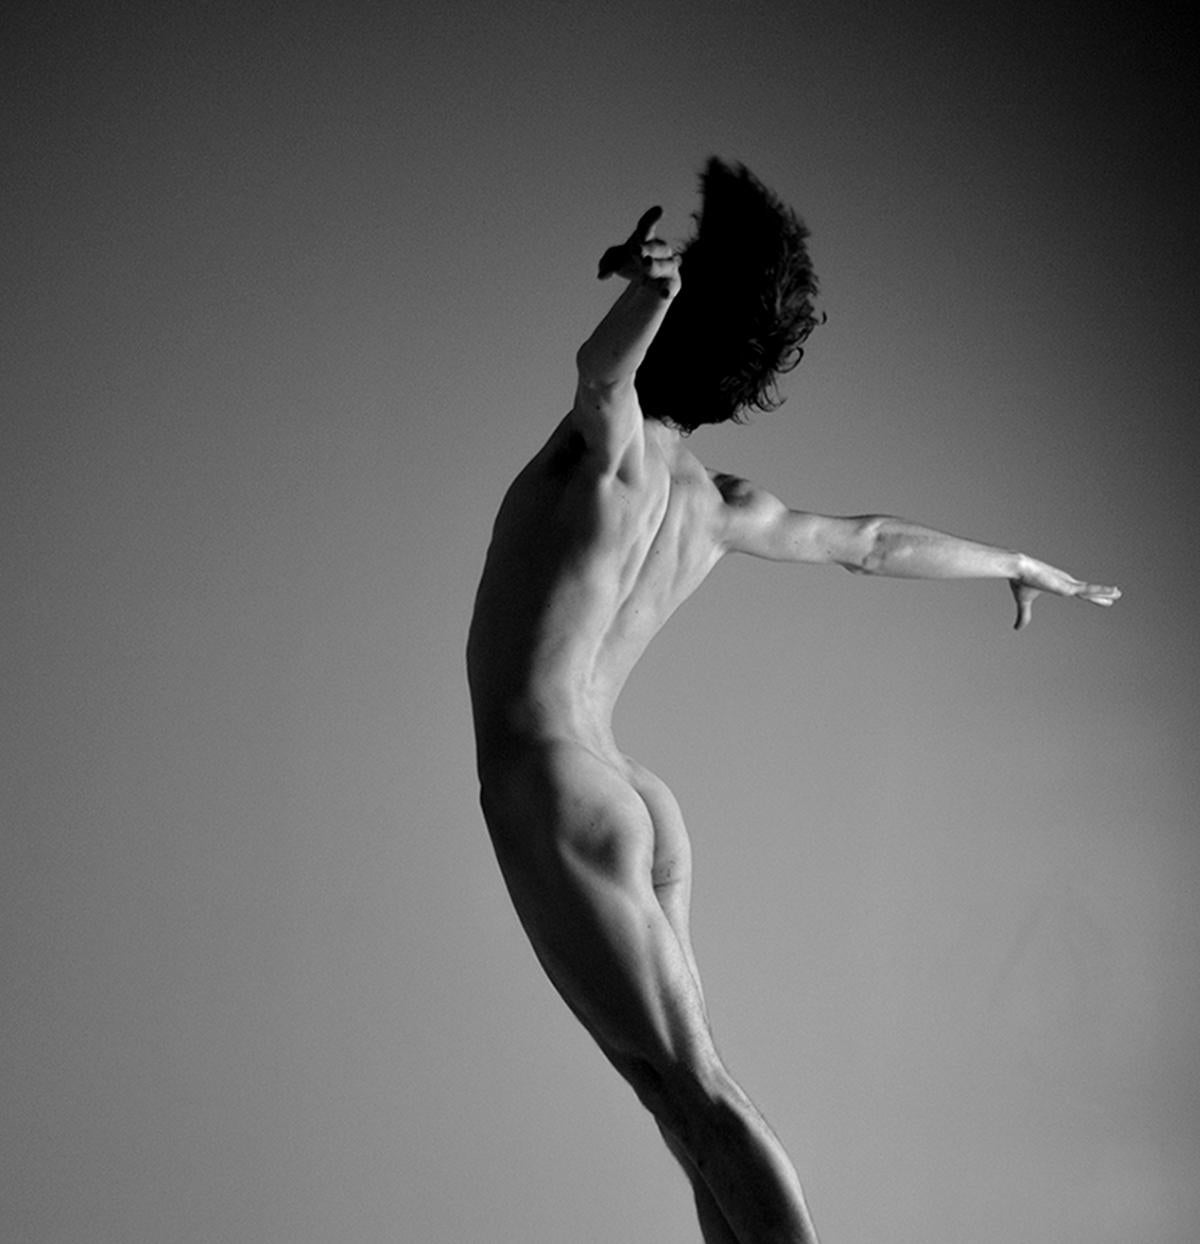 Apertura II. The Bailarín, series. Male Nude dancer Black & White photograph - Gray Black and White Photograph by Ricky Cohete